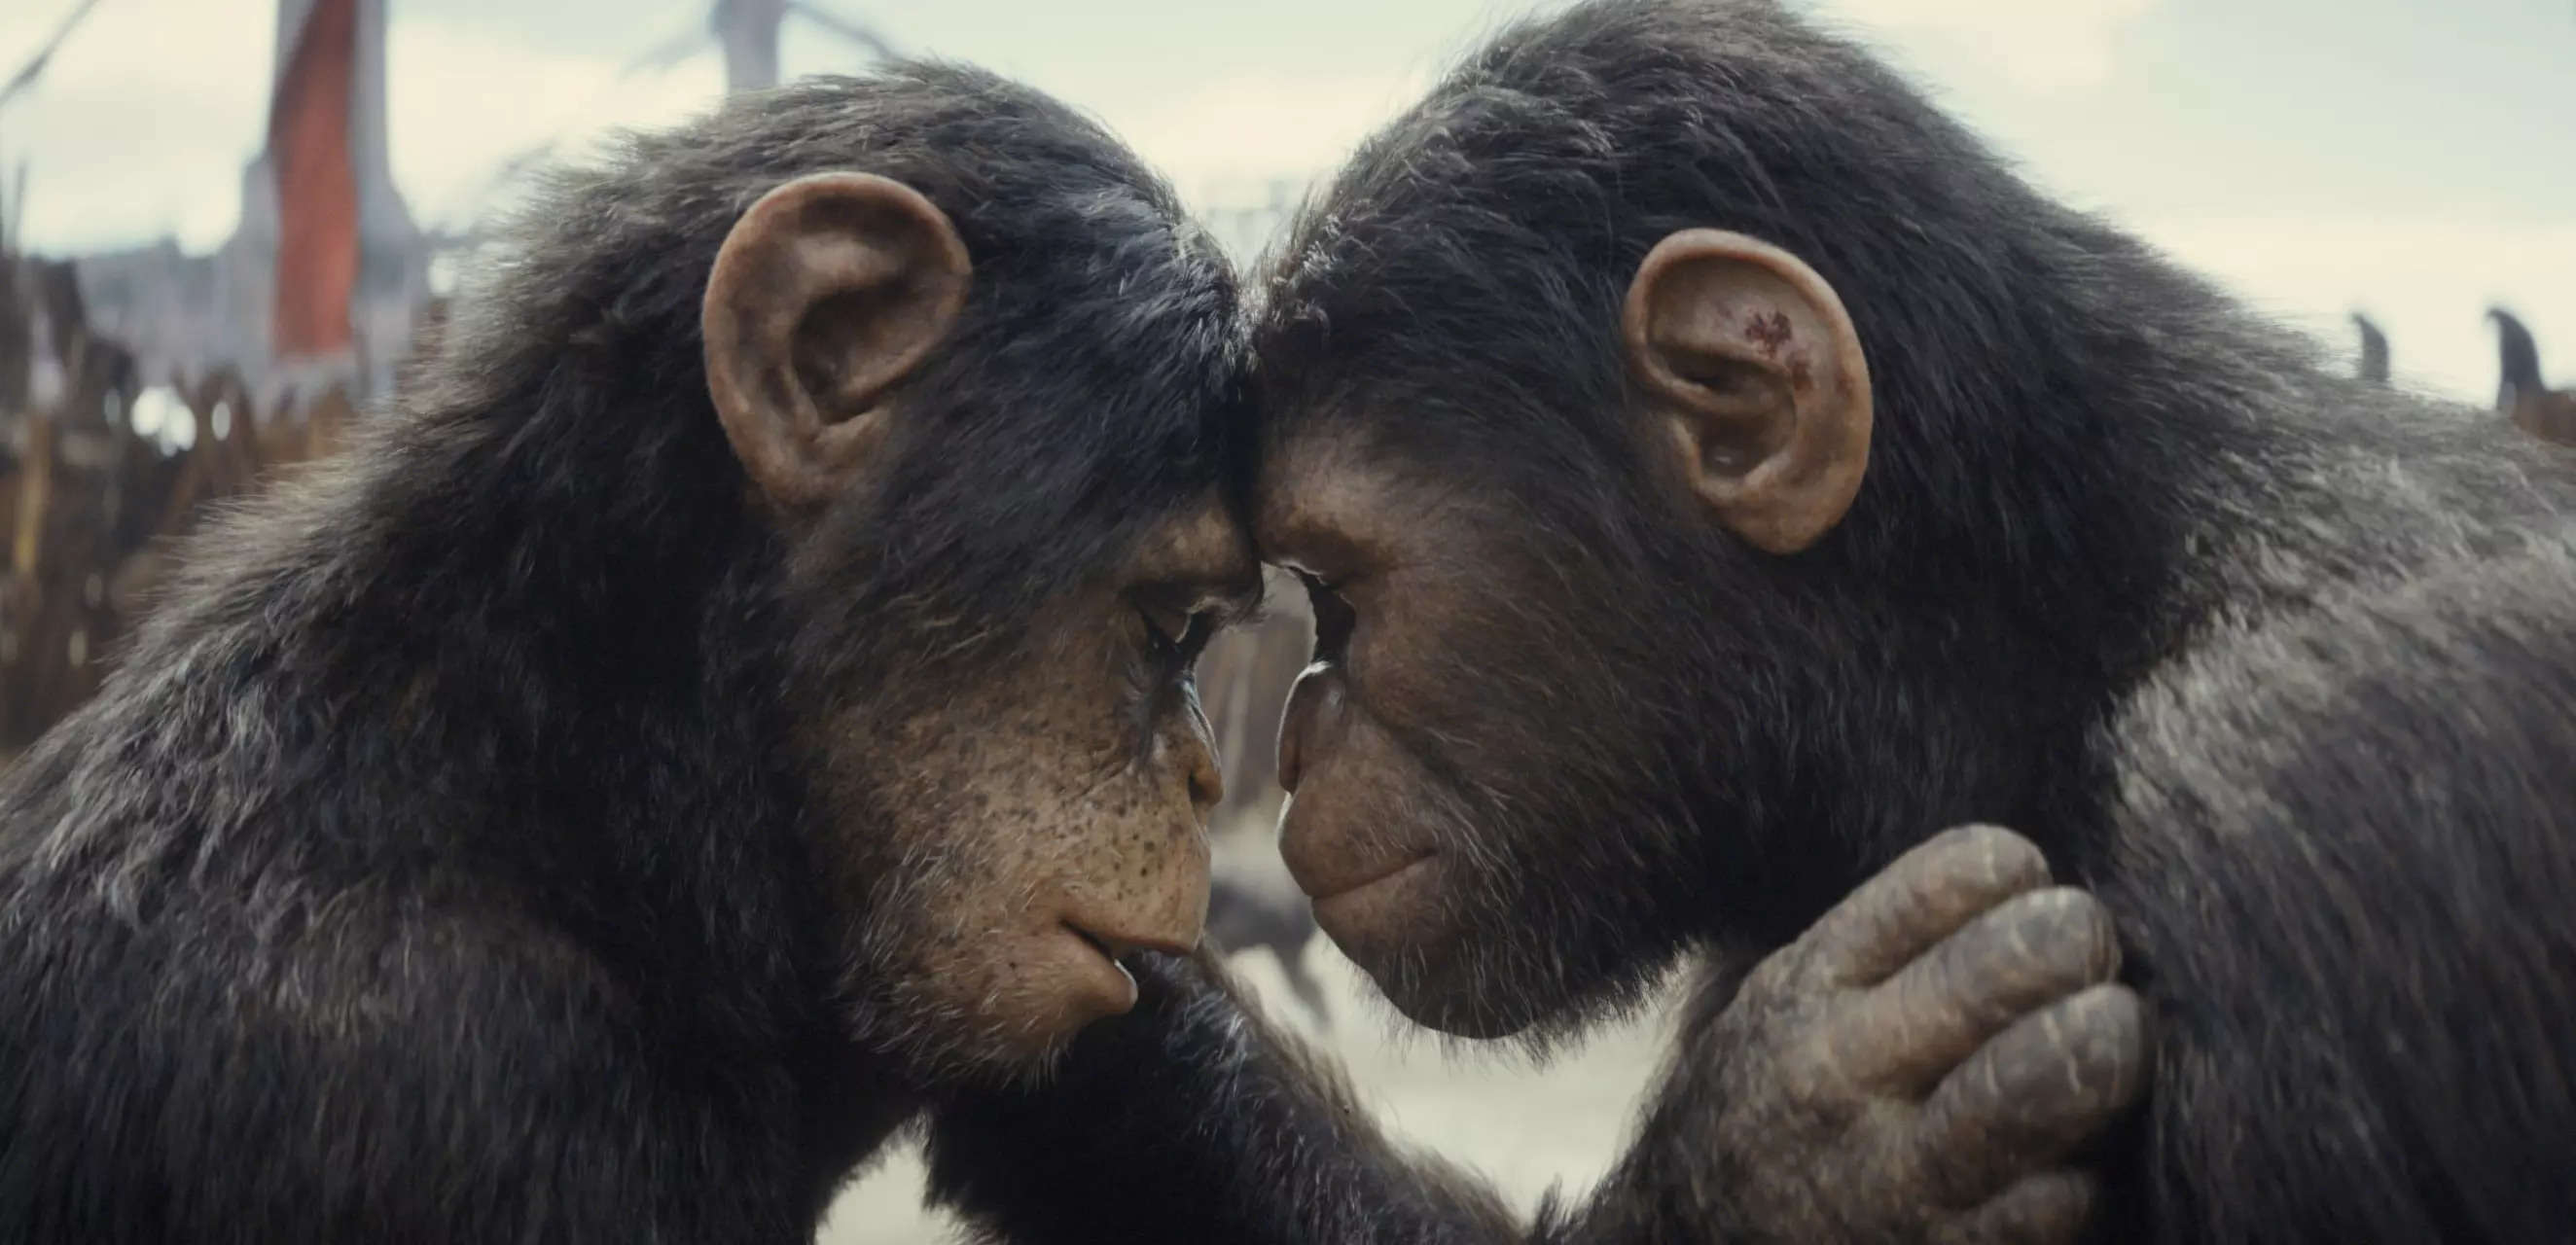 Kingdom of the Planet of the Apes: When to stream the movie on Hulu in the US 